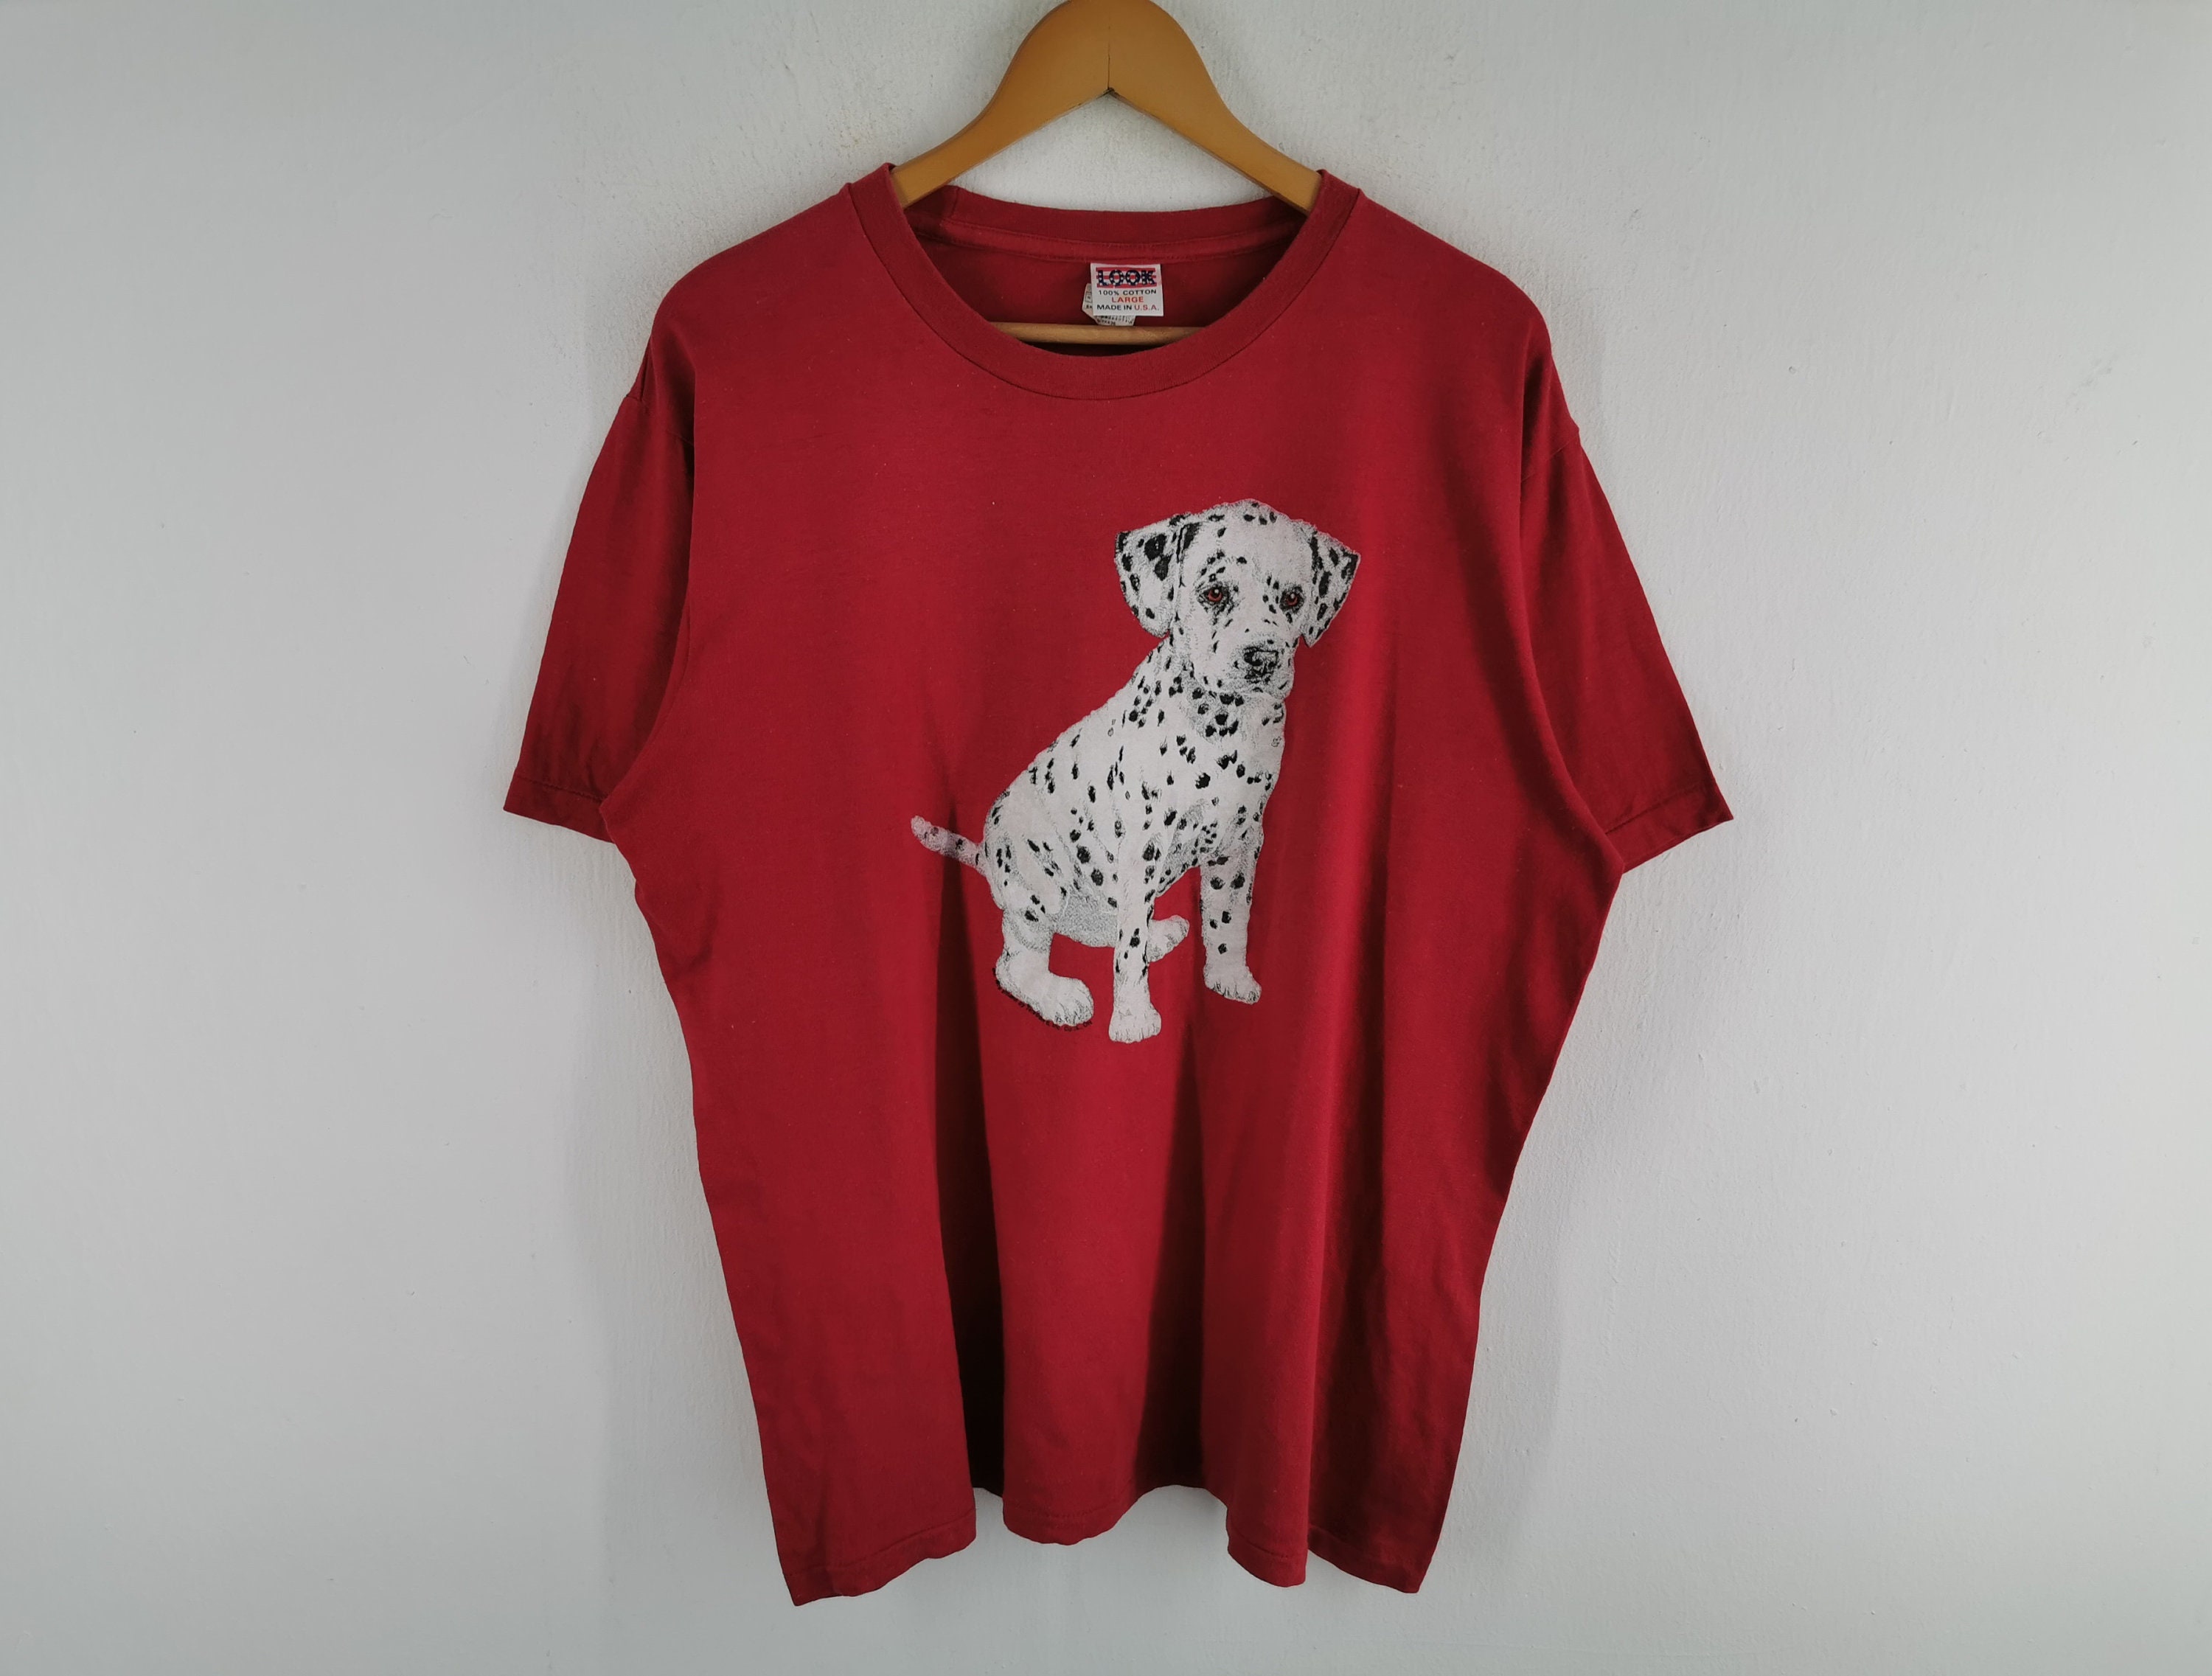 Vintage Dalmatian Shirt L Worlds Greatest Dog Breed Adorable 80s Comedic  Top Y2K